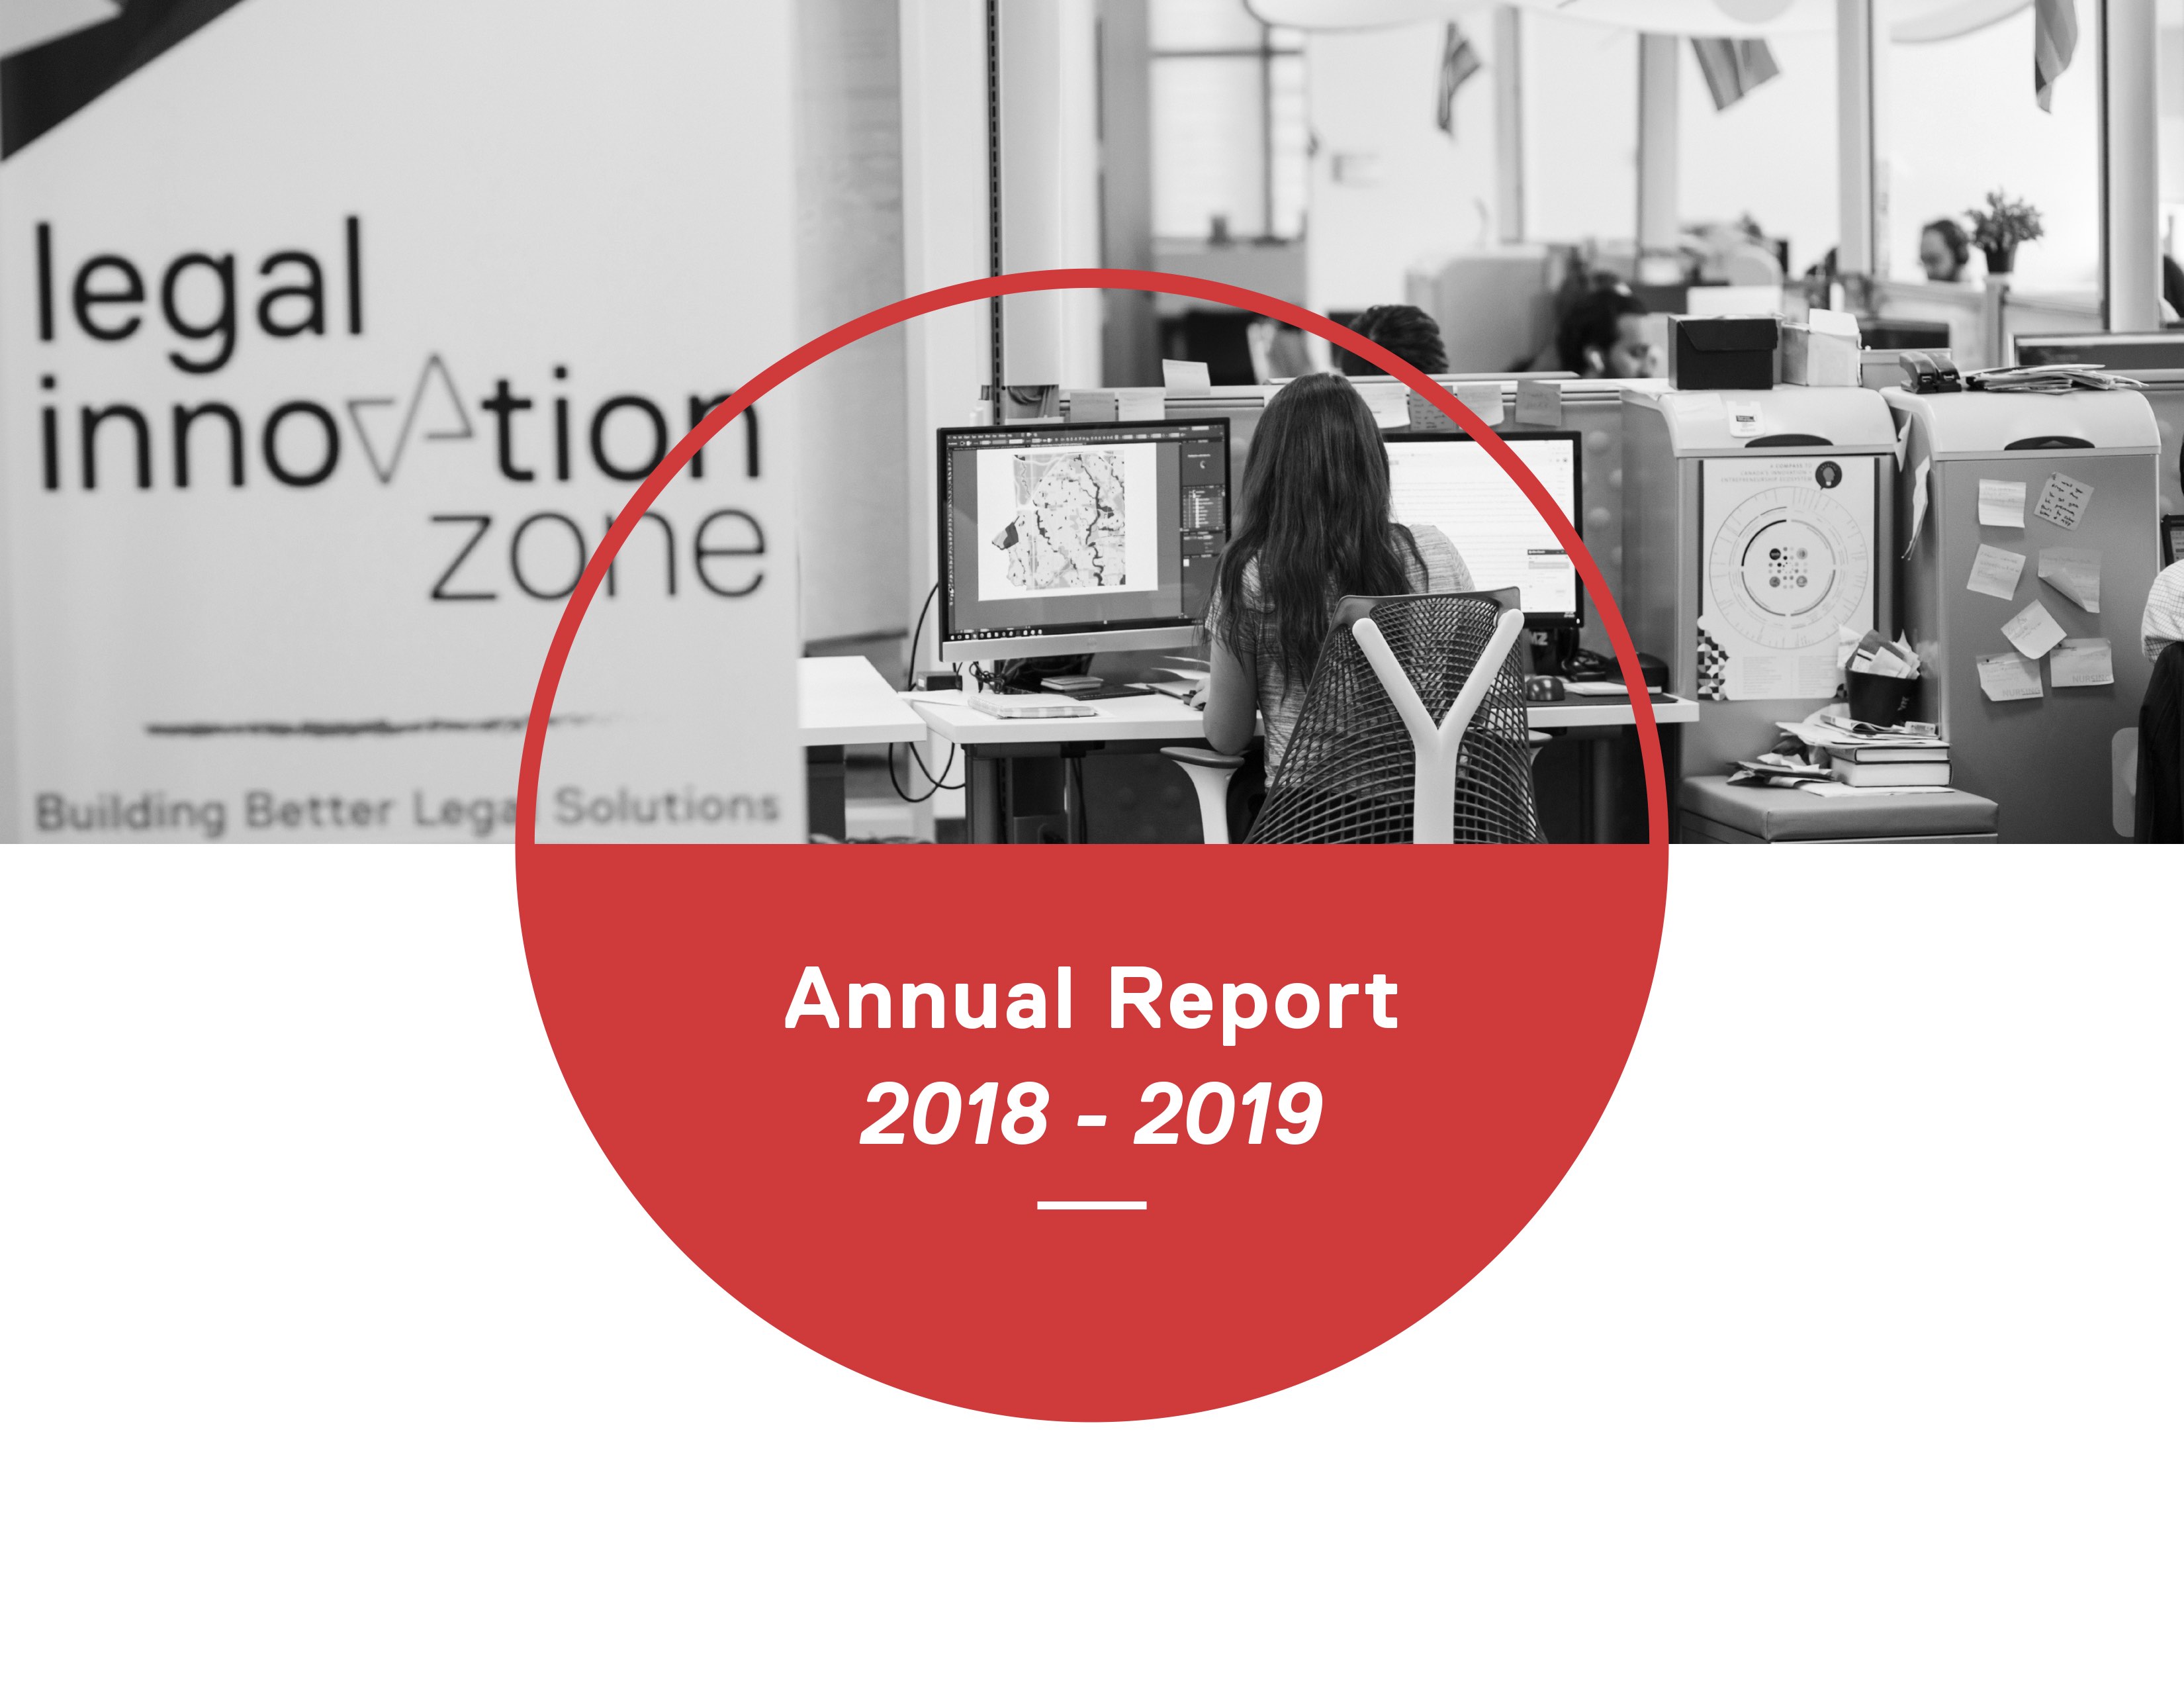 LIZ Annual Report for 2018 - 2019